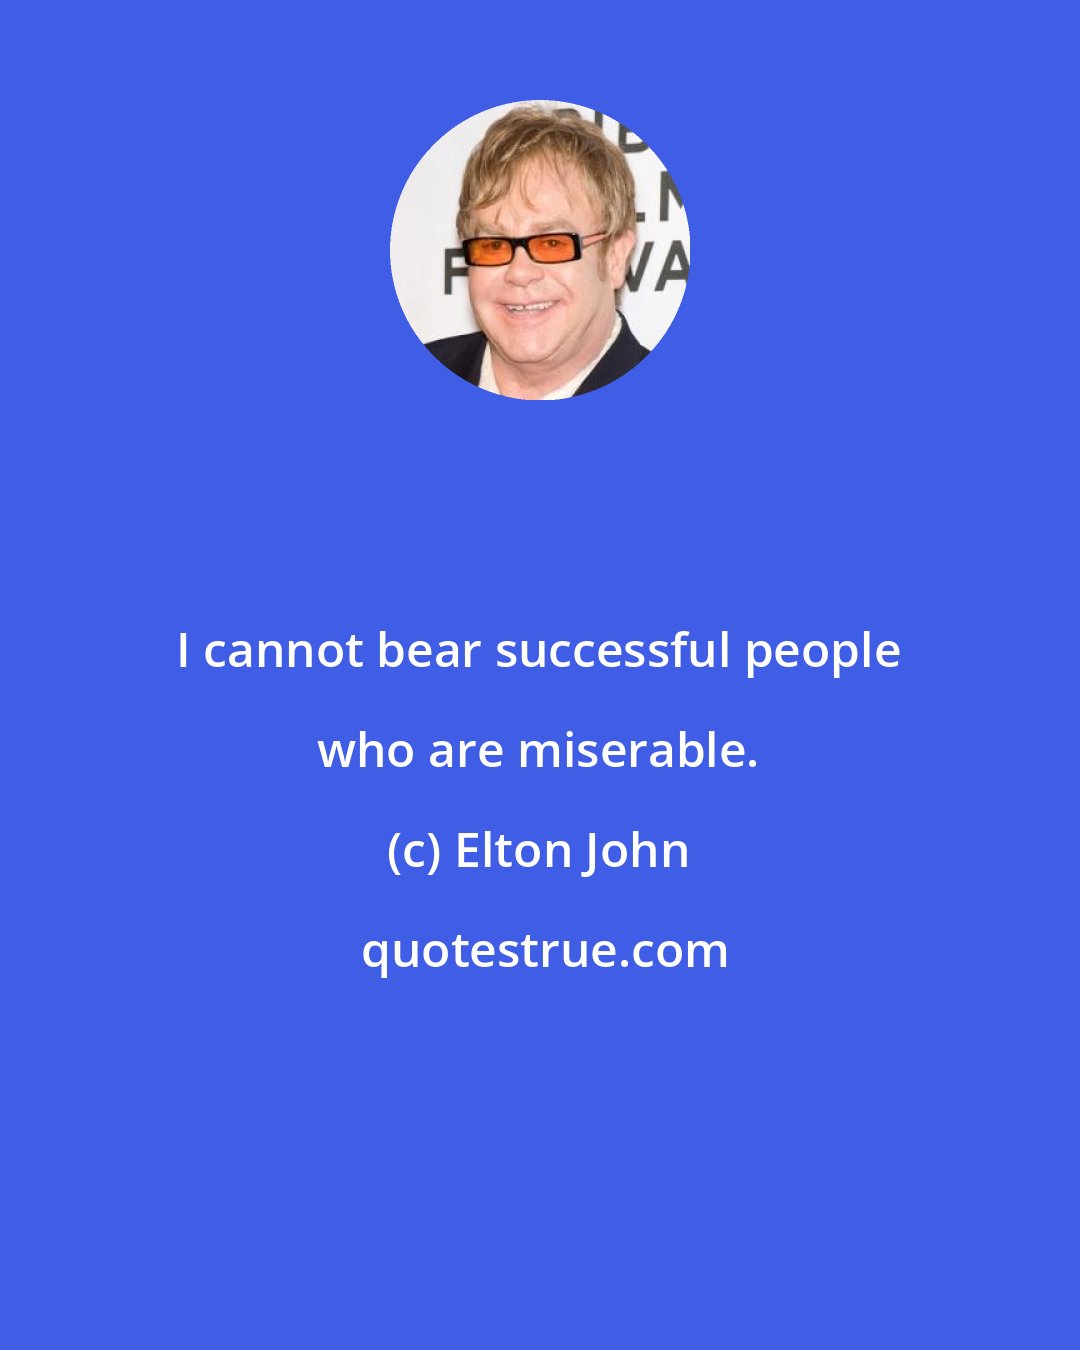 Elton John: I cannot bear successful people who are miserable.